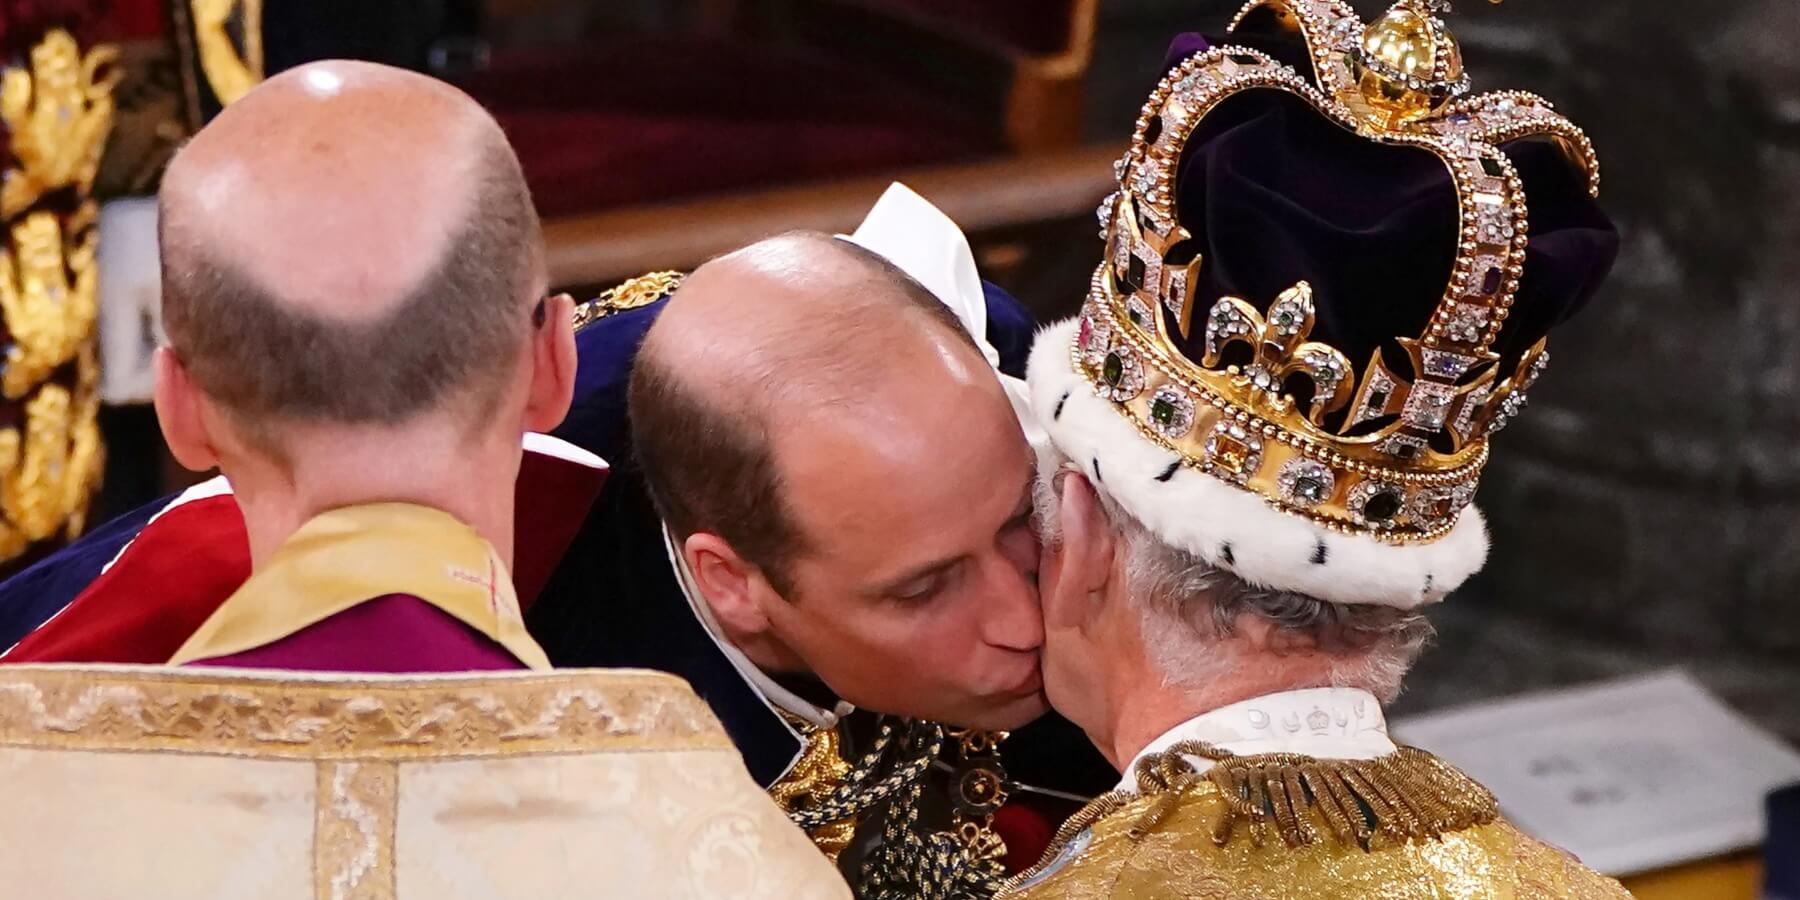 Prince William kisses his father King Charles during his coronation.